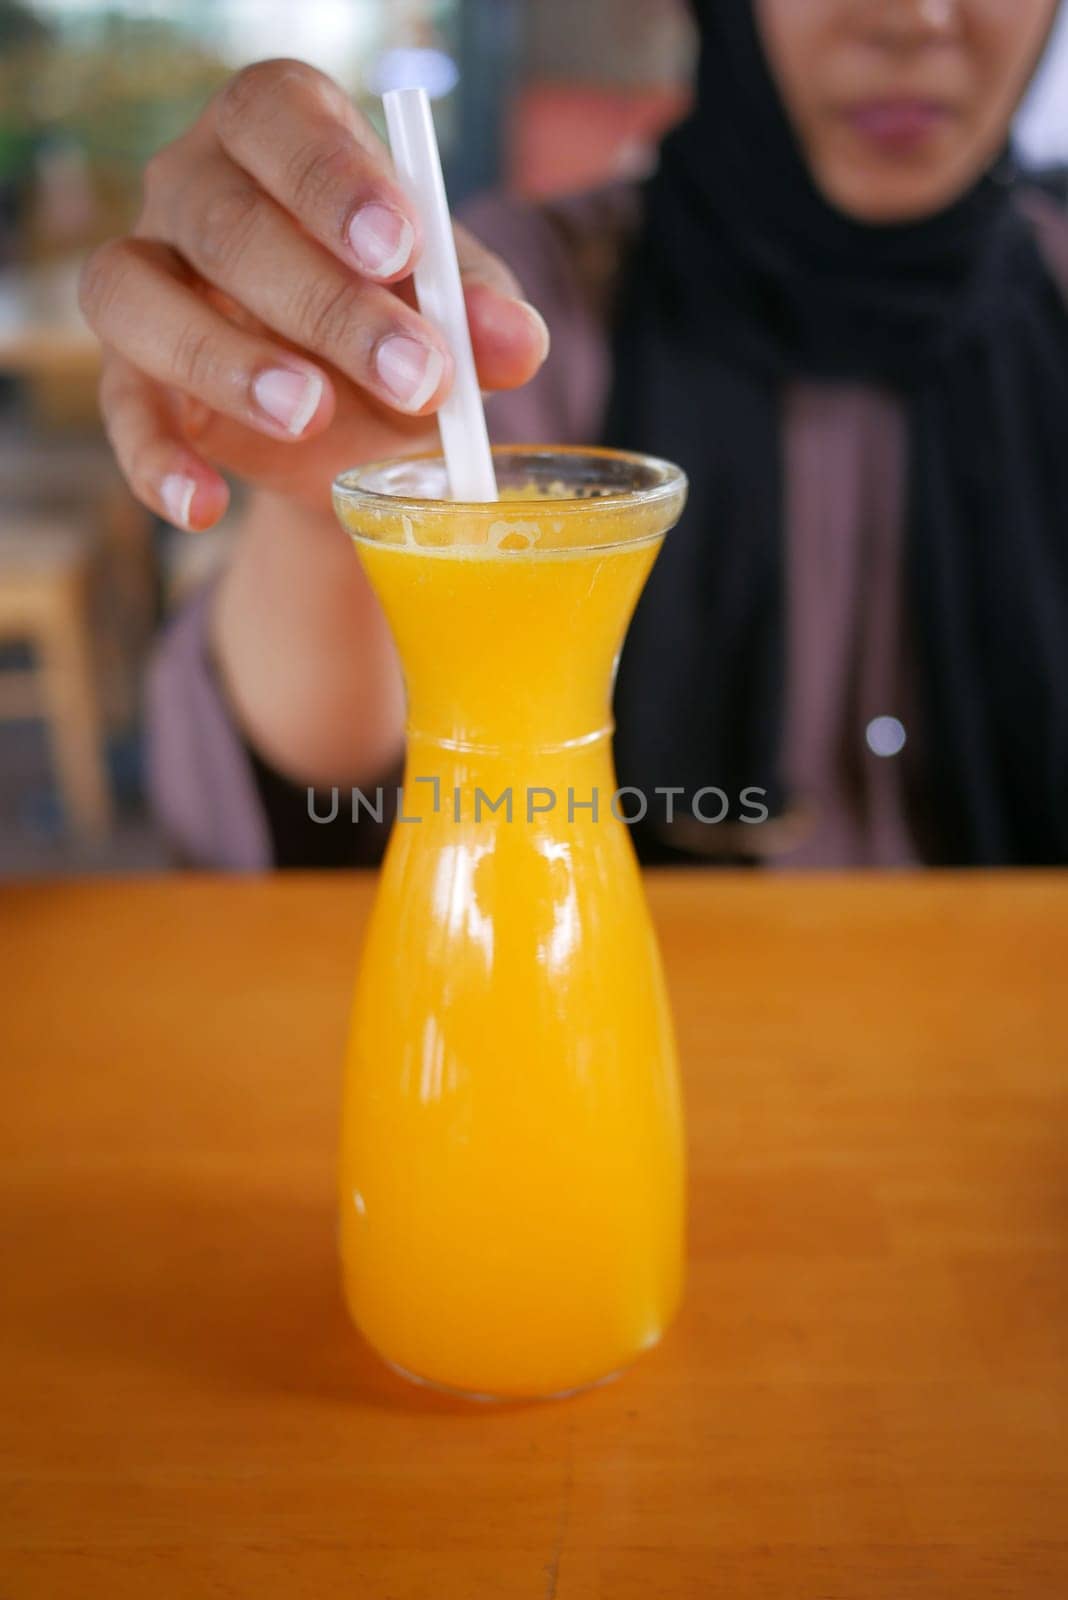 women hand holding a glass of orange juice by towfiq007